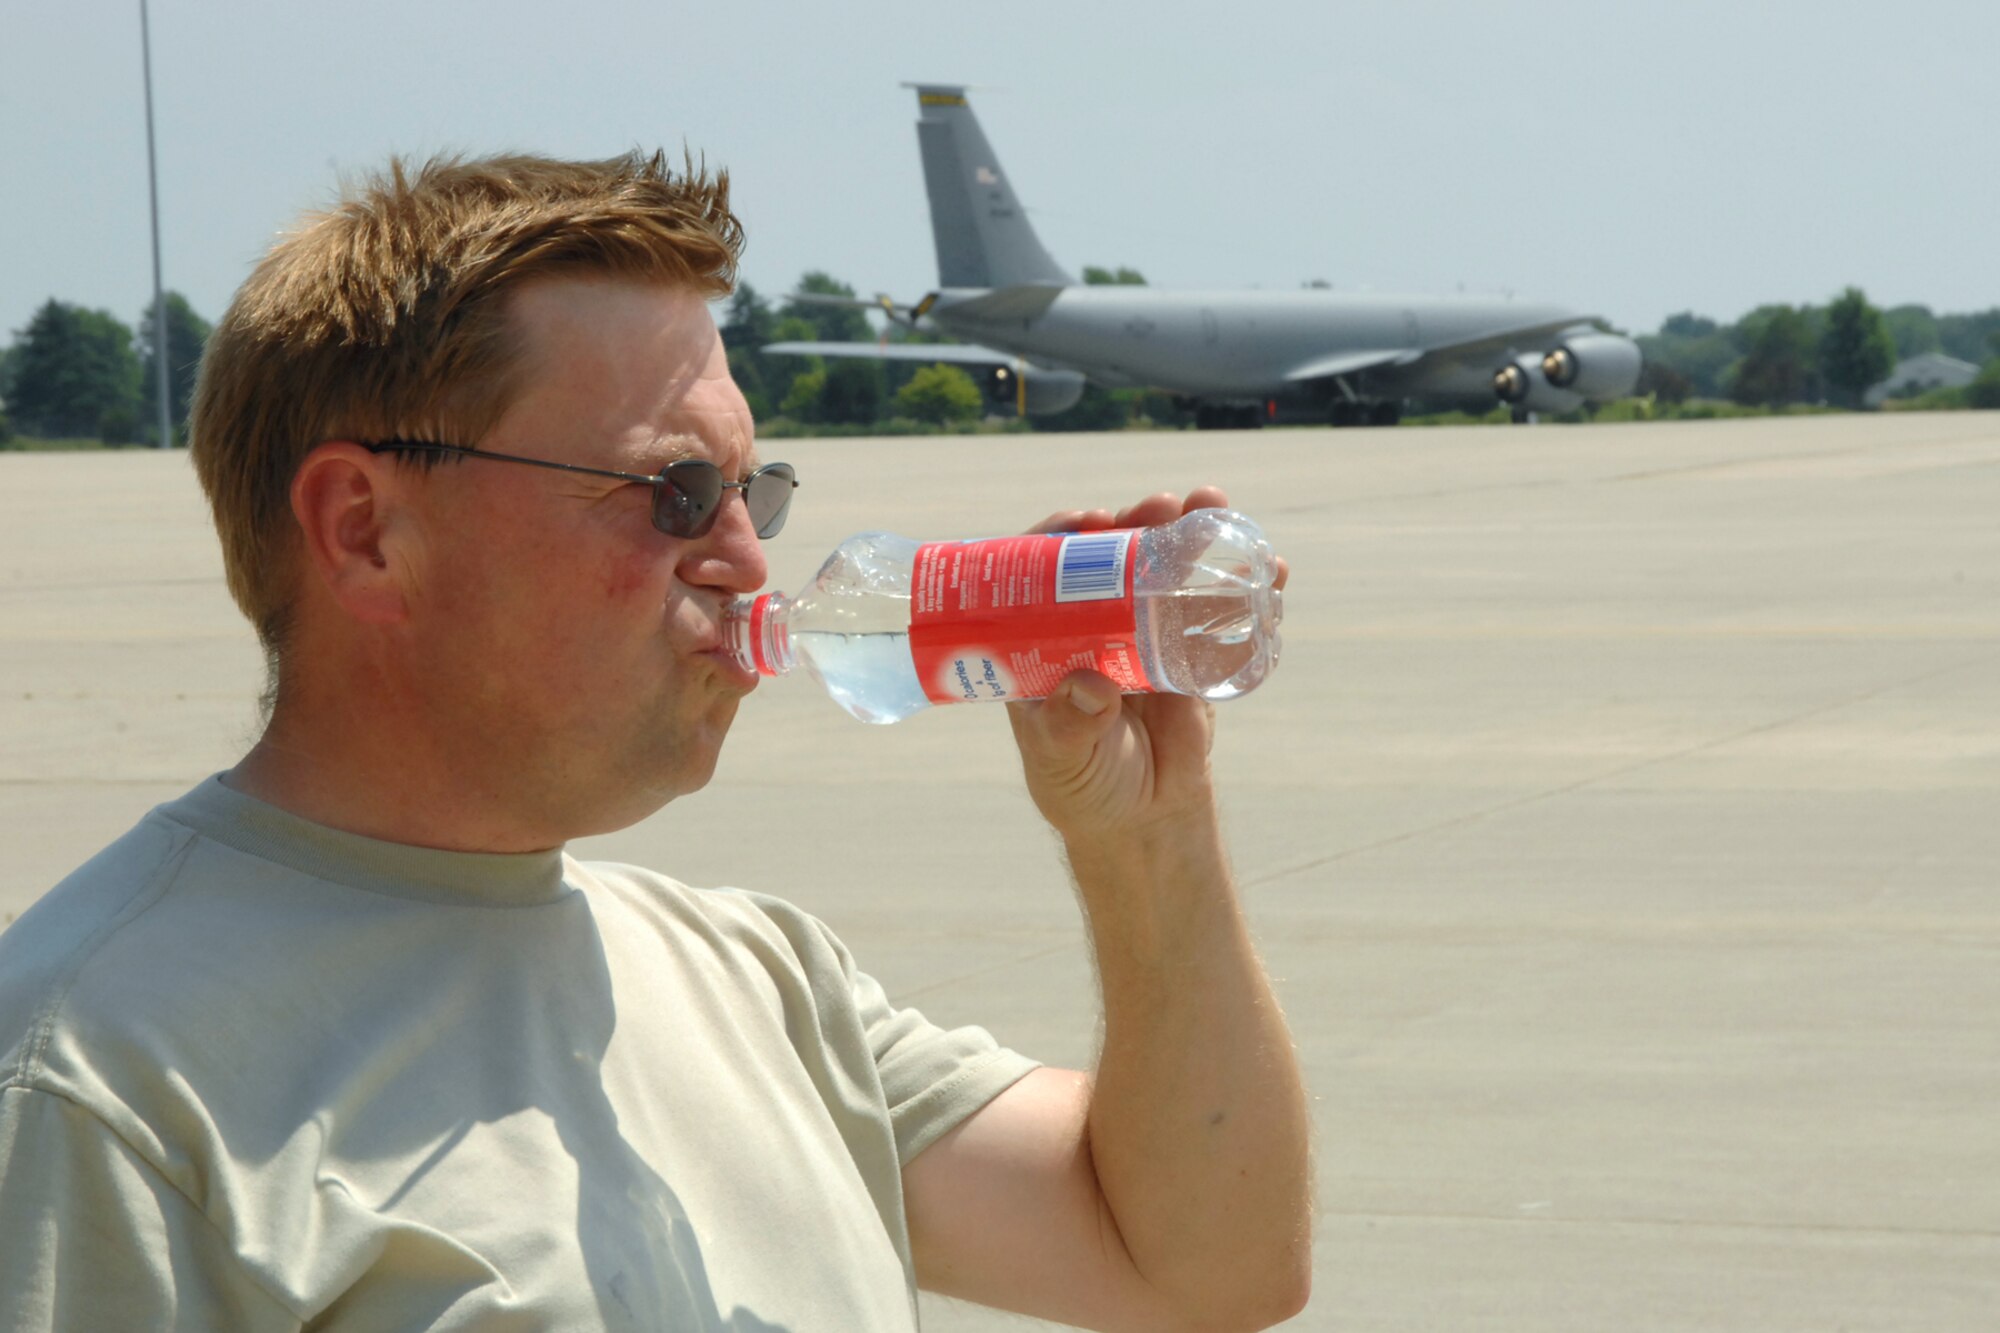 Technical Sgt. Carl Tyynismaa takes a drink of water after spending the day Monday, July 18, 2011 working on a KC-135 Stratotanker aircraft at Selfridge Air National Guard Base, Mich. The heat index on the flight line was above 100 degrees in mid-afternoon, causing Airmen at the base to drink extra water and take regular breaks in the shade. Tyynismaa is a crew chief assigned to the 127th Wing, Michigan Air National Guard, at the base. (USAF photo by Rachel Barton)